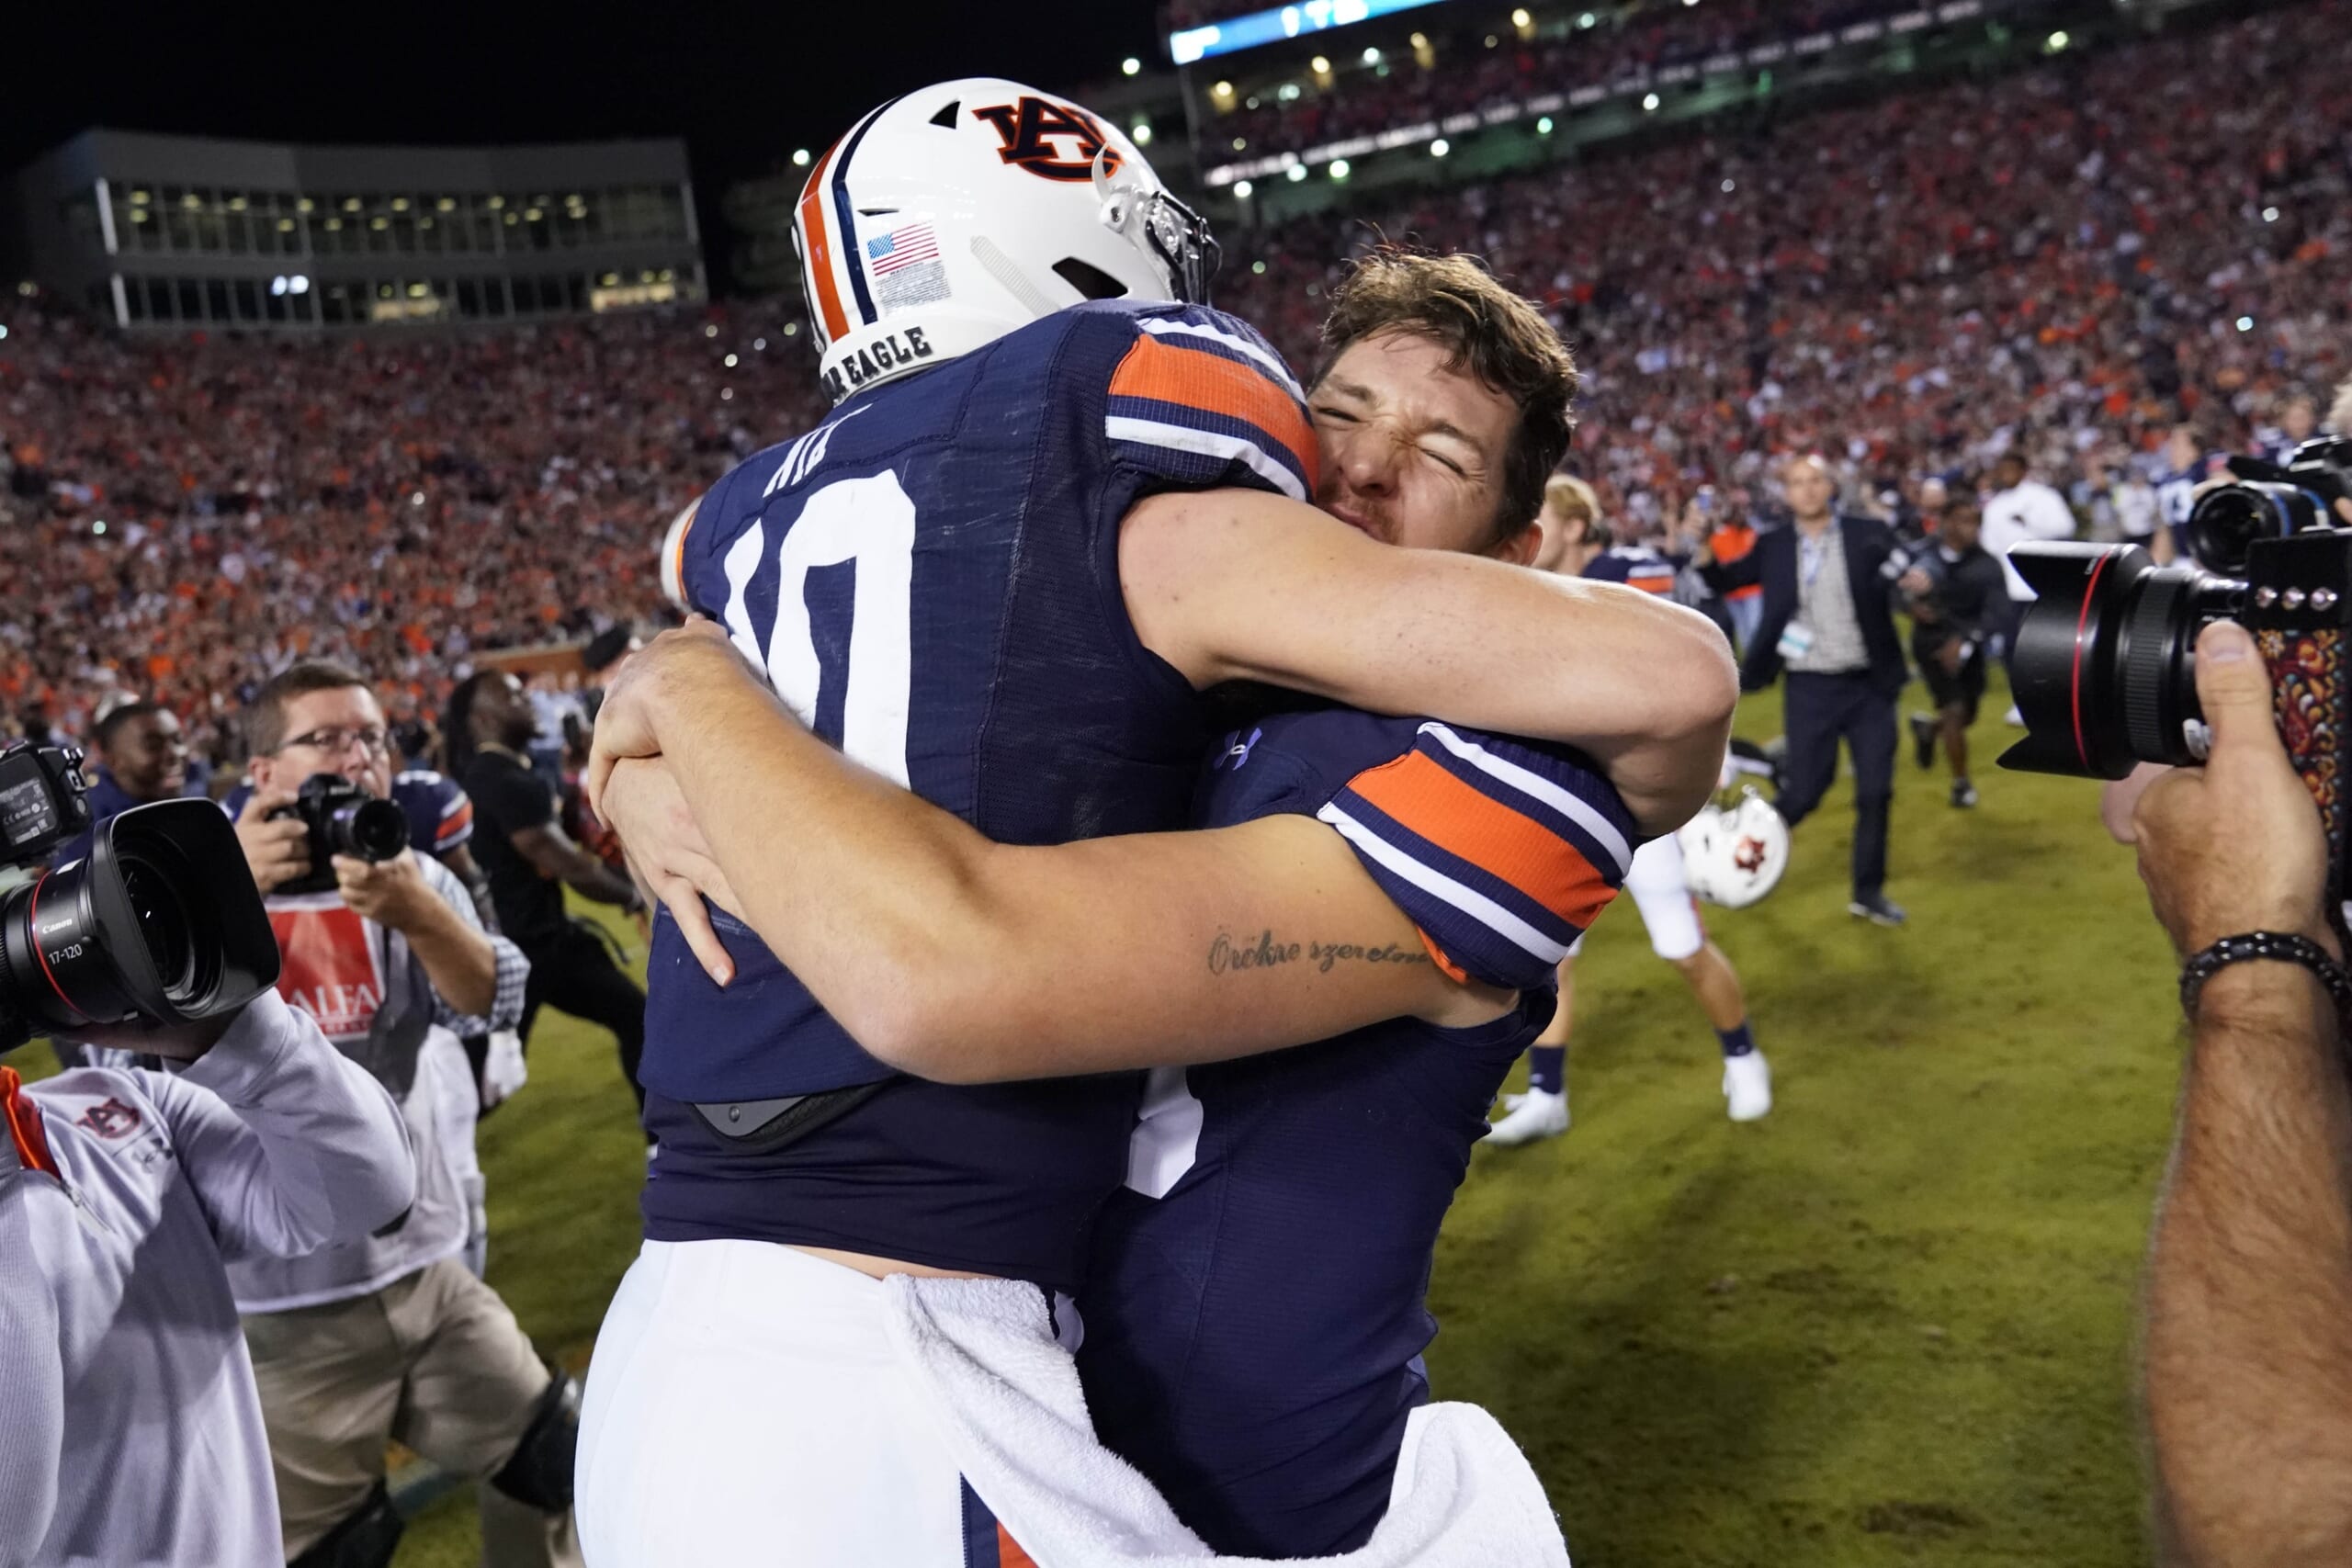 Cfb World Reacts To Auburn Beating Alabama In Thrilling Iron